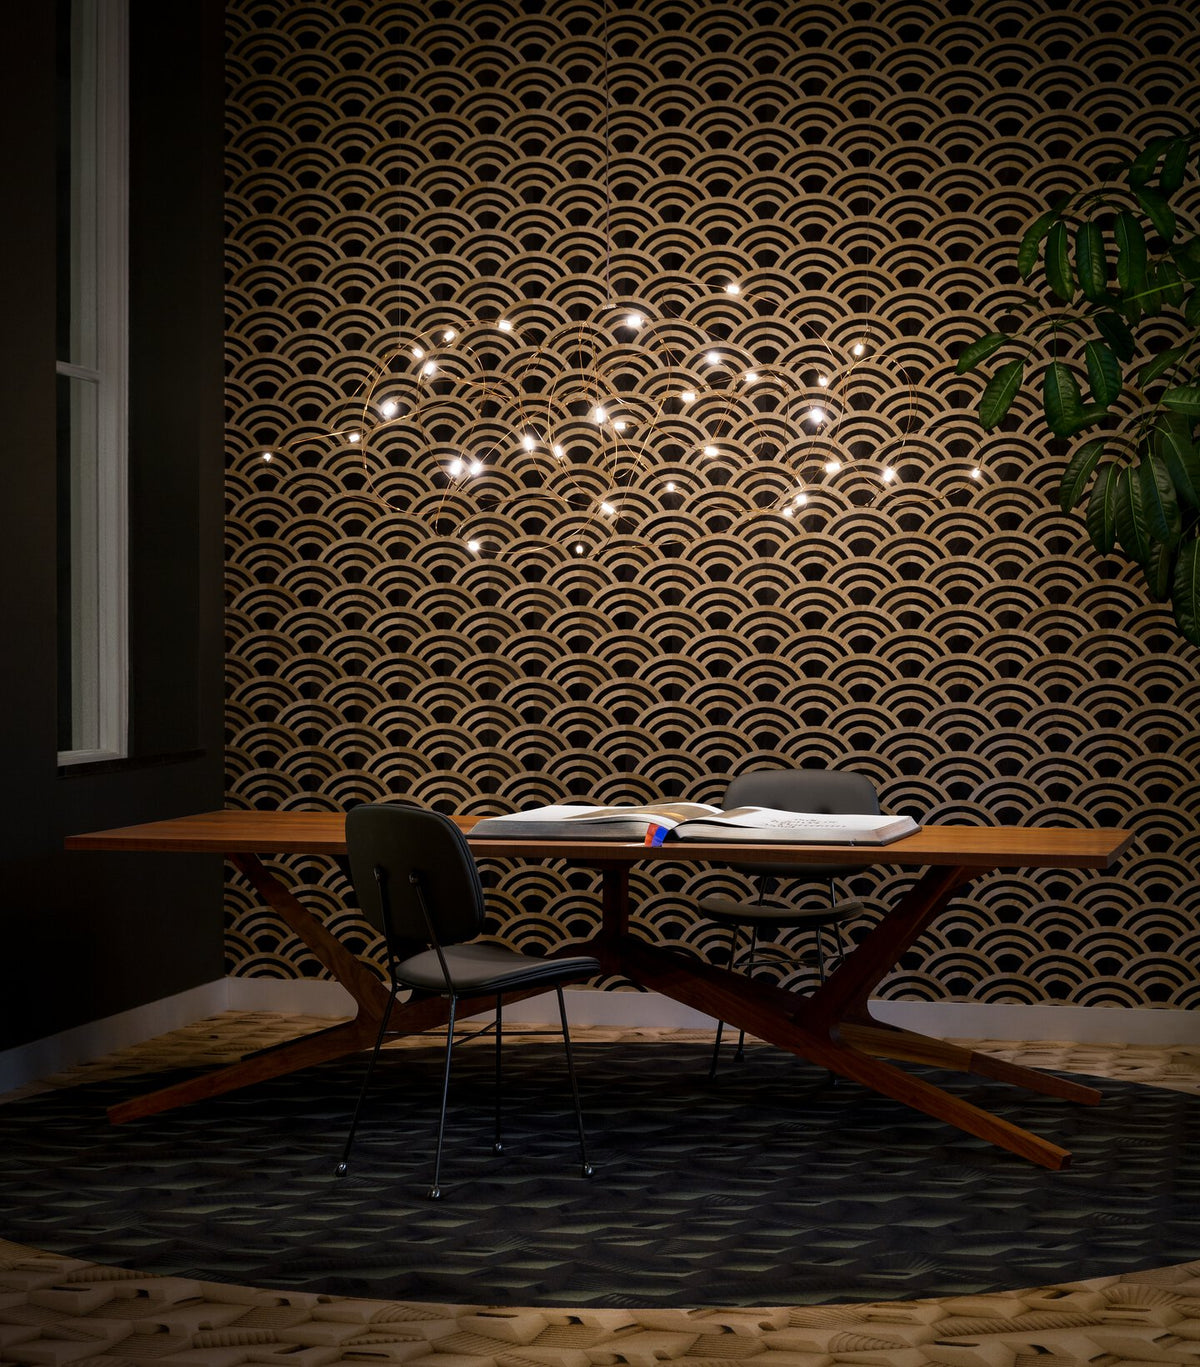 Flock of Light by Moooi